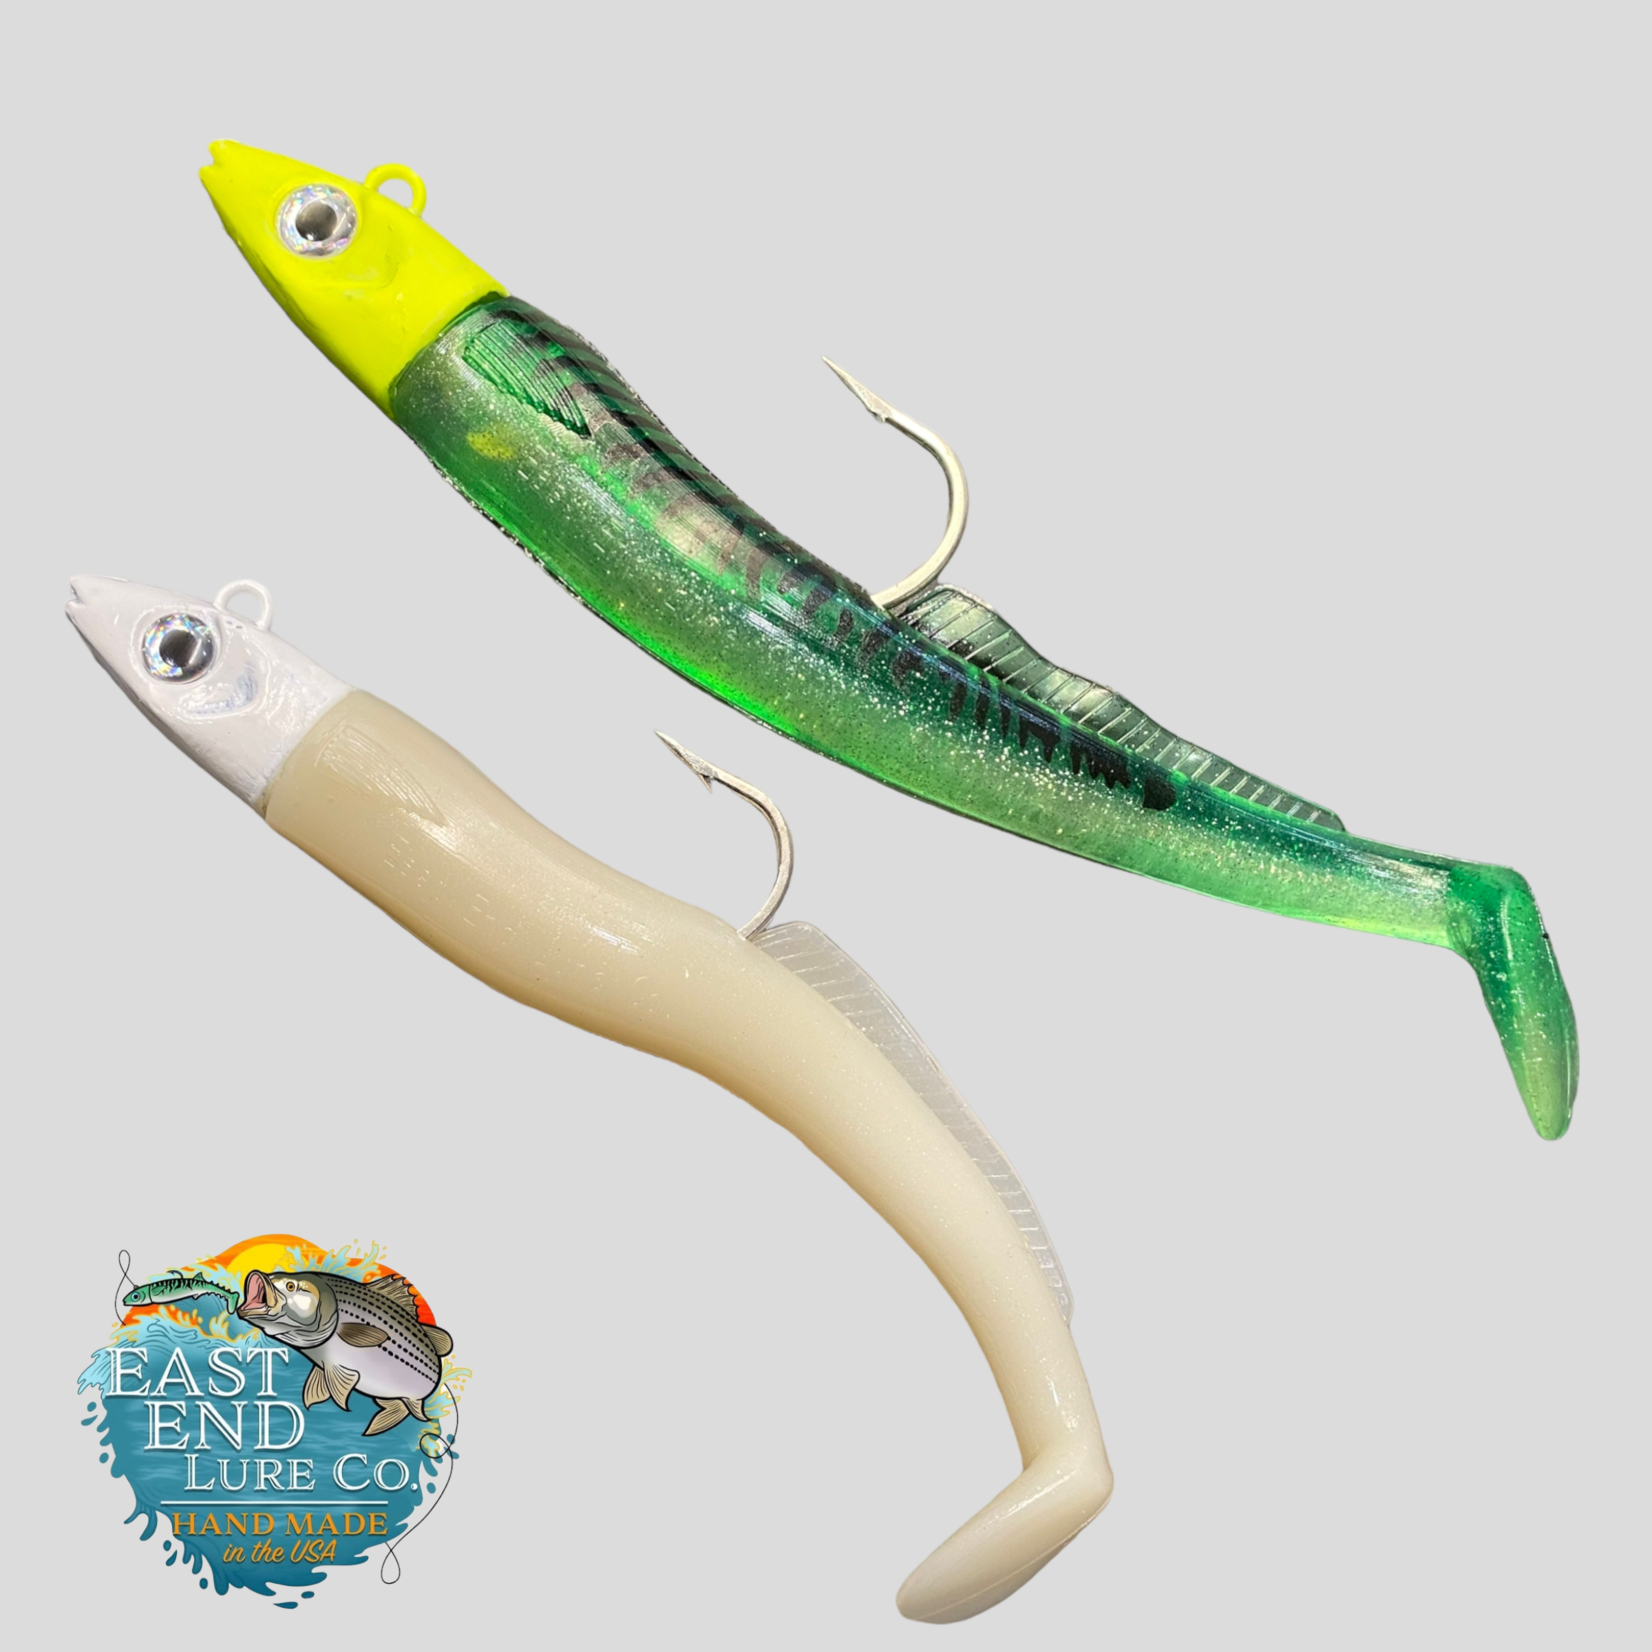 East End Lures CO. East End Lures Sandeel 5.5oz